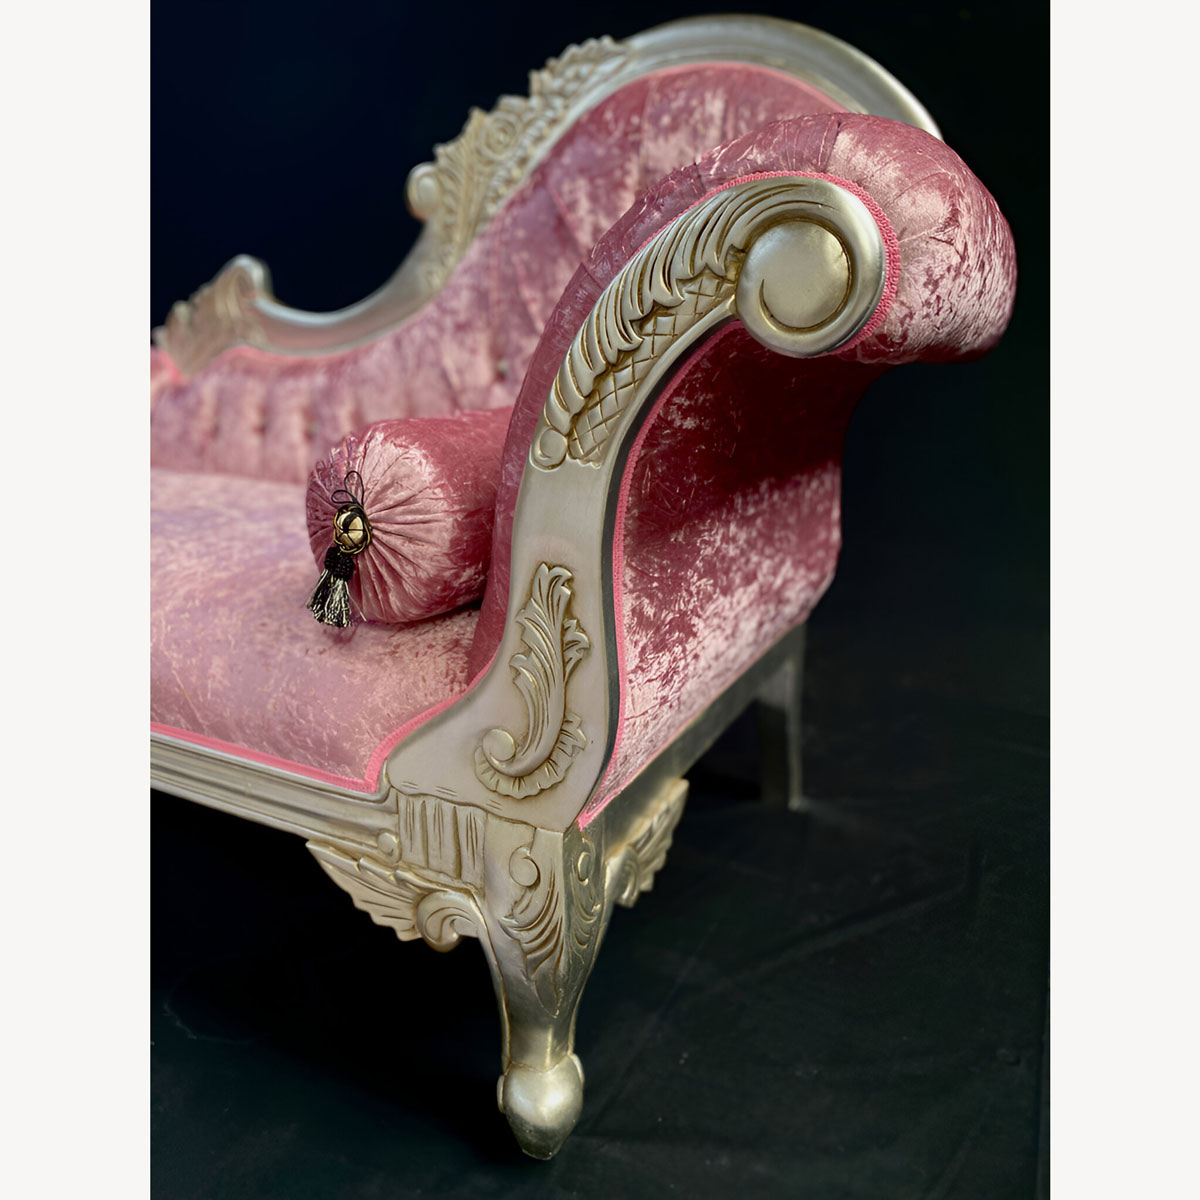 Chaise Hampshire Sofa In Silver Leaf Frame Upholstered In Baby Pink Crushed Velvet With Crystal Buttoning 2 - Hampshire Barn Interiors - Chaise Hampshire Sofa In Silver Leaf Frame Upholstered In Baby Pink Crushed Velvet With Crystal Buttoning -